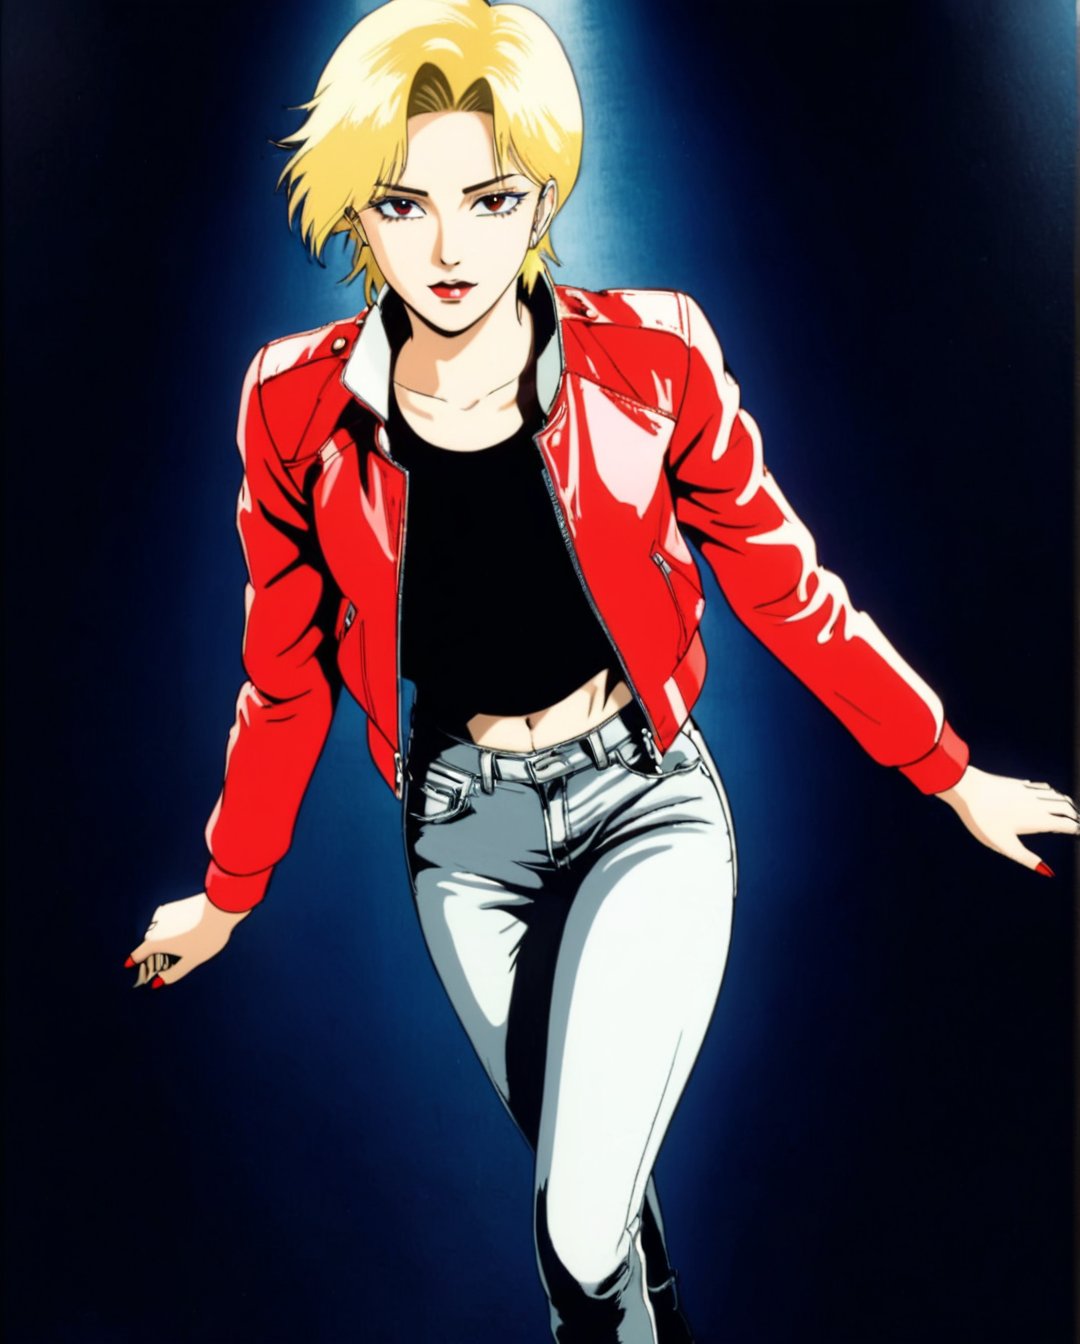 ((masterpiece)), ((best quality)), (masterpiece, highest quality), (masterpiece), Flat-colored still of (((masterpiece))), (((highest quality))), ((Very detailed)), masutepiece, Best Quality,  a girl with dark olive skin and short dark blonde hair was dressed in a red leather jacket, black jeans, and a black t-shirt., depth of field, art style by Yoshiaki Kawajiri